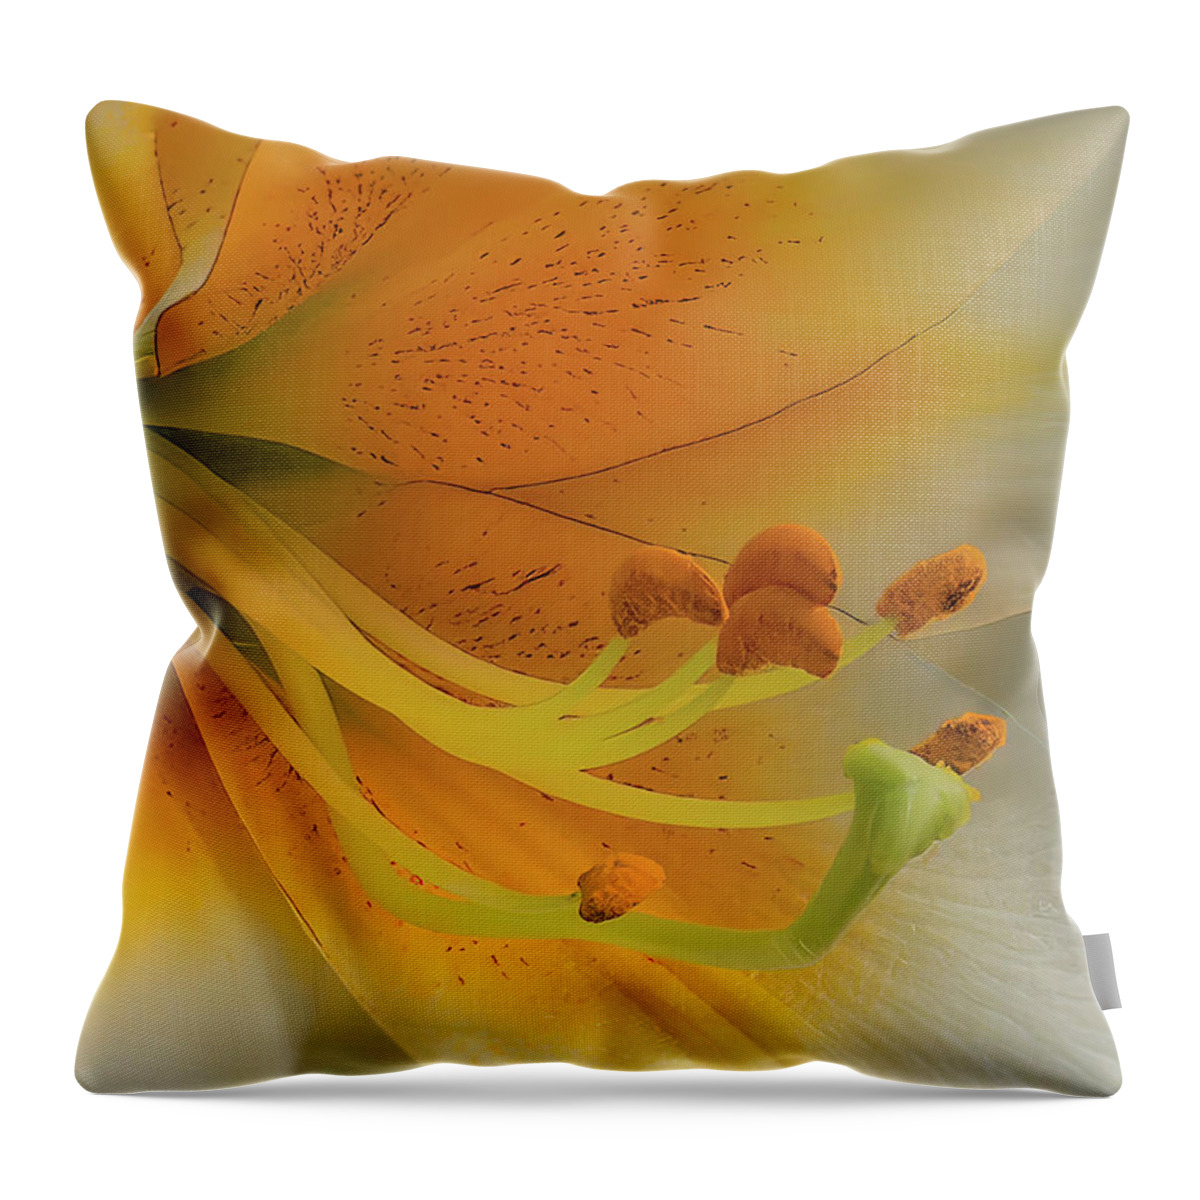 Daylily Throw Pillow featuring the photograph Gold Daylily Close-up by Patti Deters